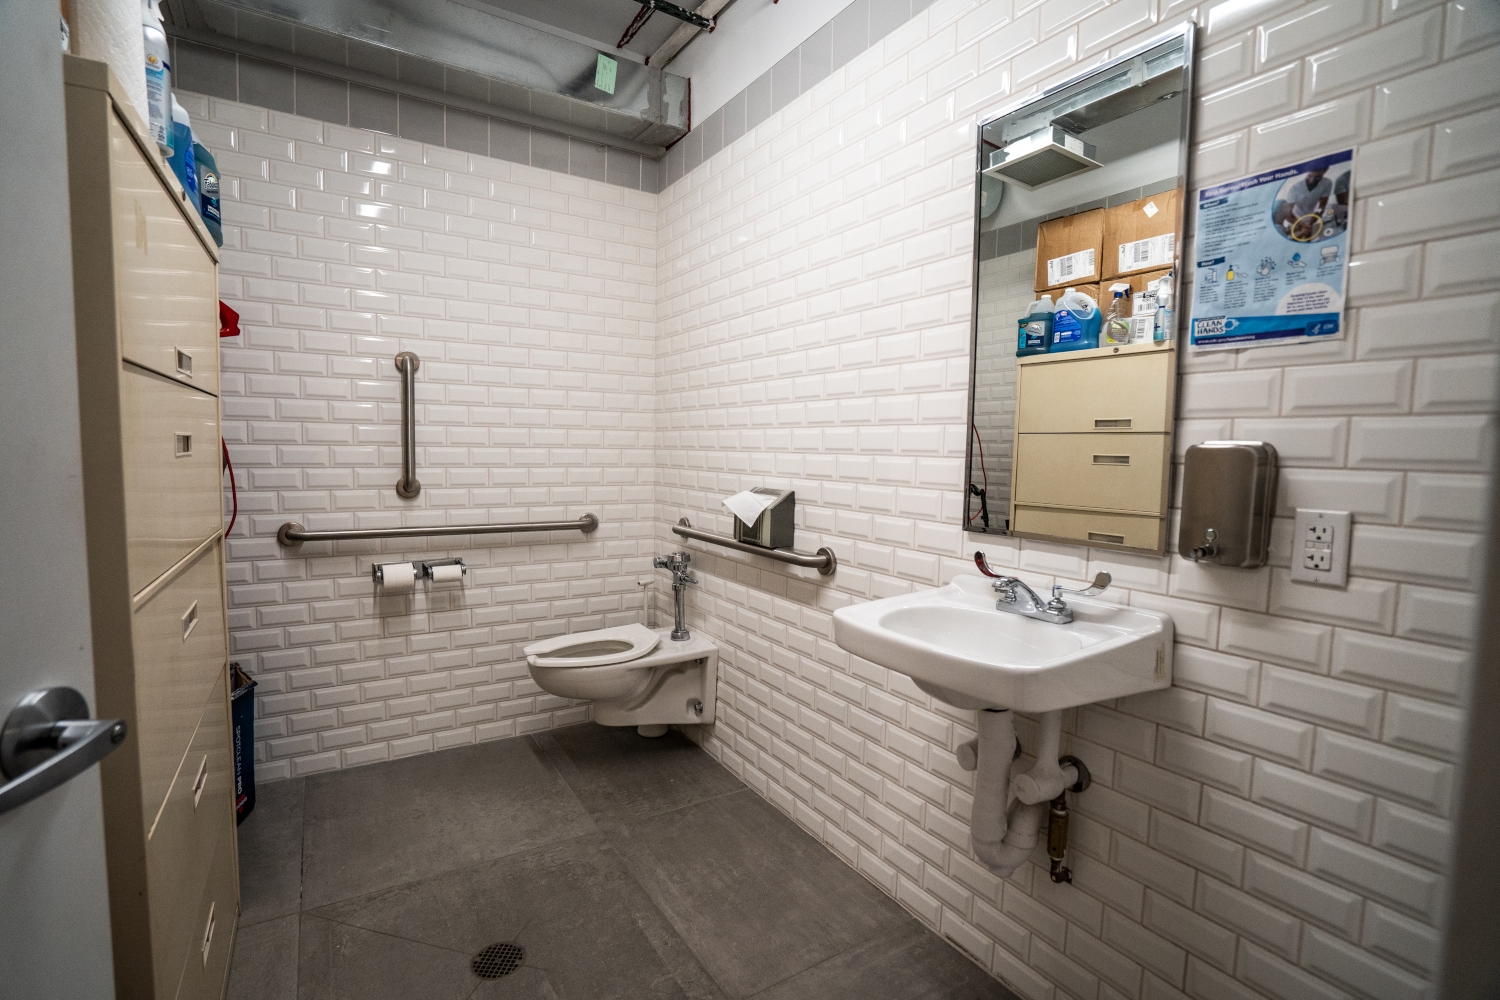 Another view of the renovated modern bathroom in 80 White Street showing new wall and floor tiles, new drains, modern fixtures, and eco-friendly appliances